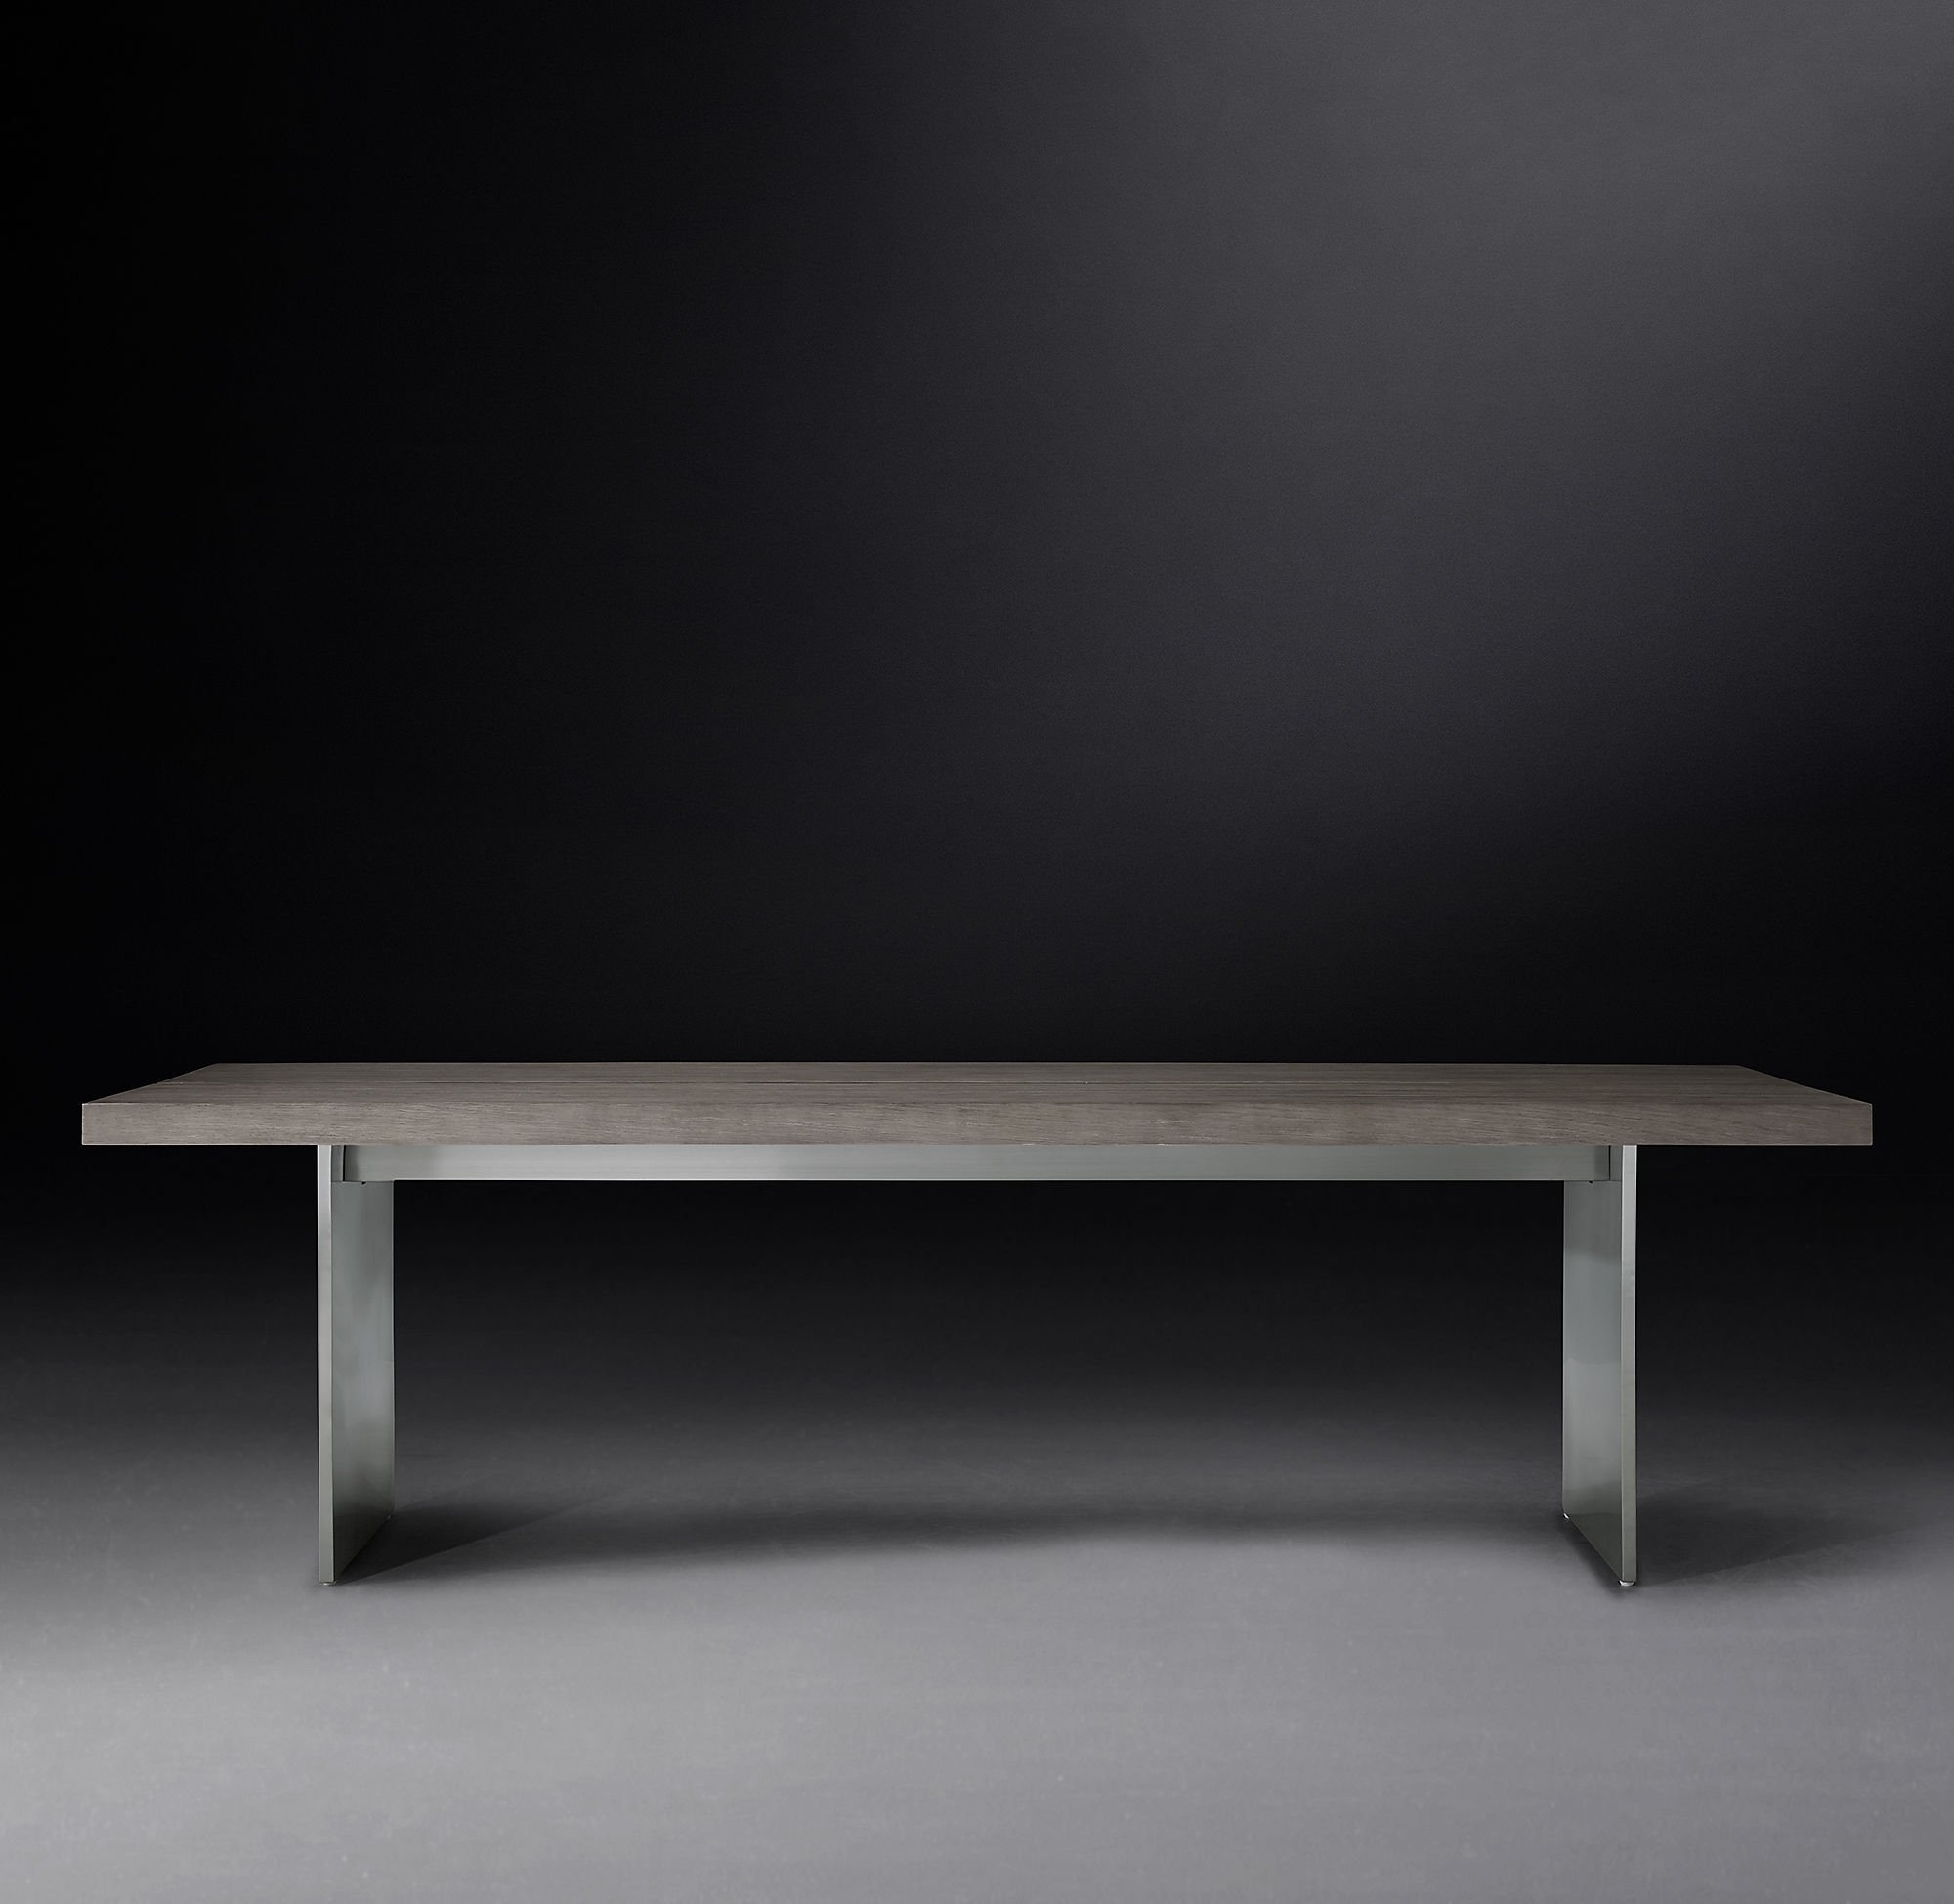 CHANNEL RECTANGULAR DINING TABLE 108" - Image 0